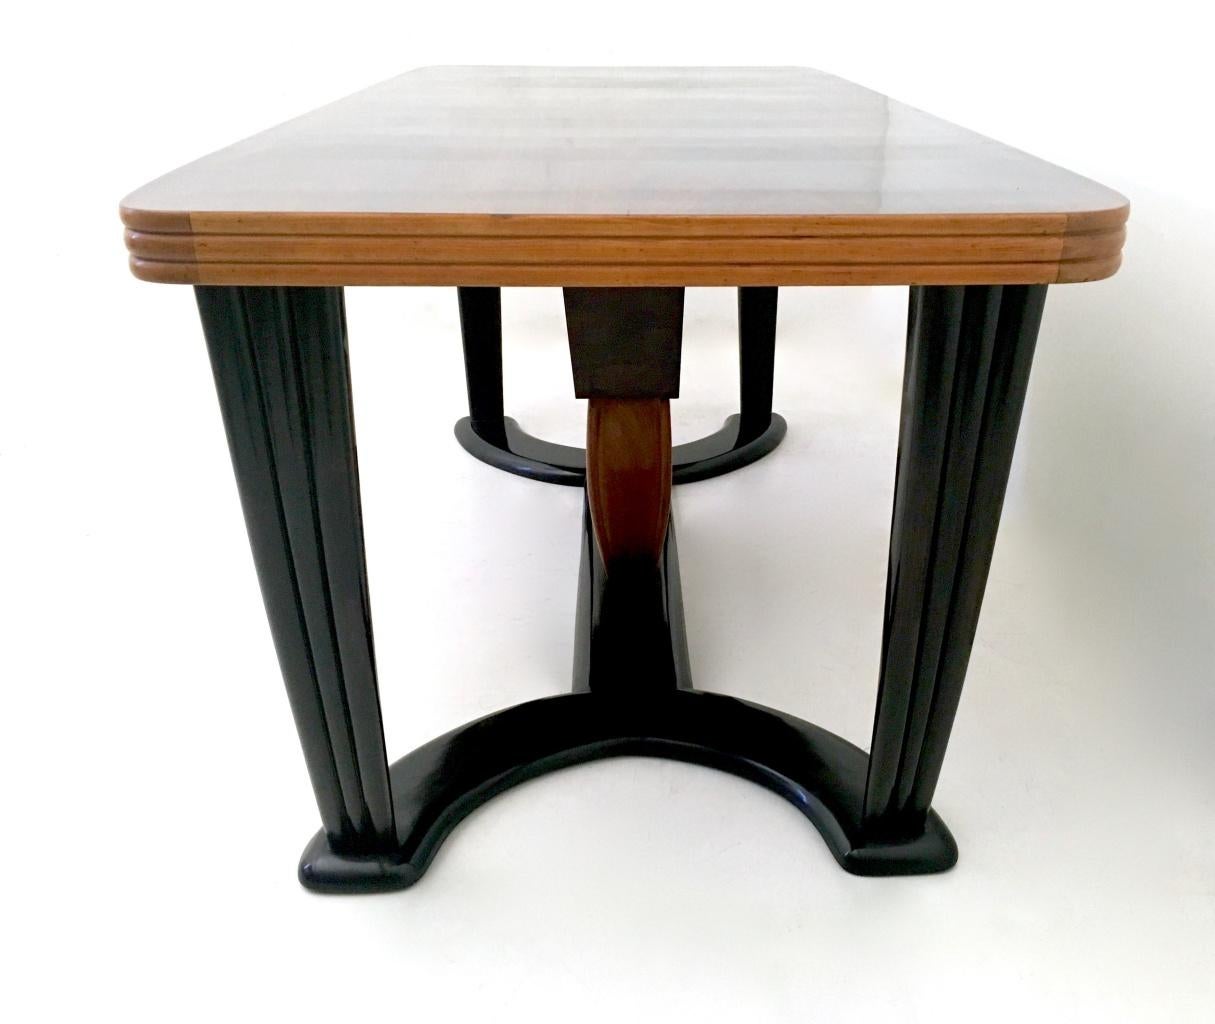 Italian Dining Table Ascribable to Borsani with Removable Black Opaline Glass Top, Italy